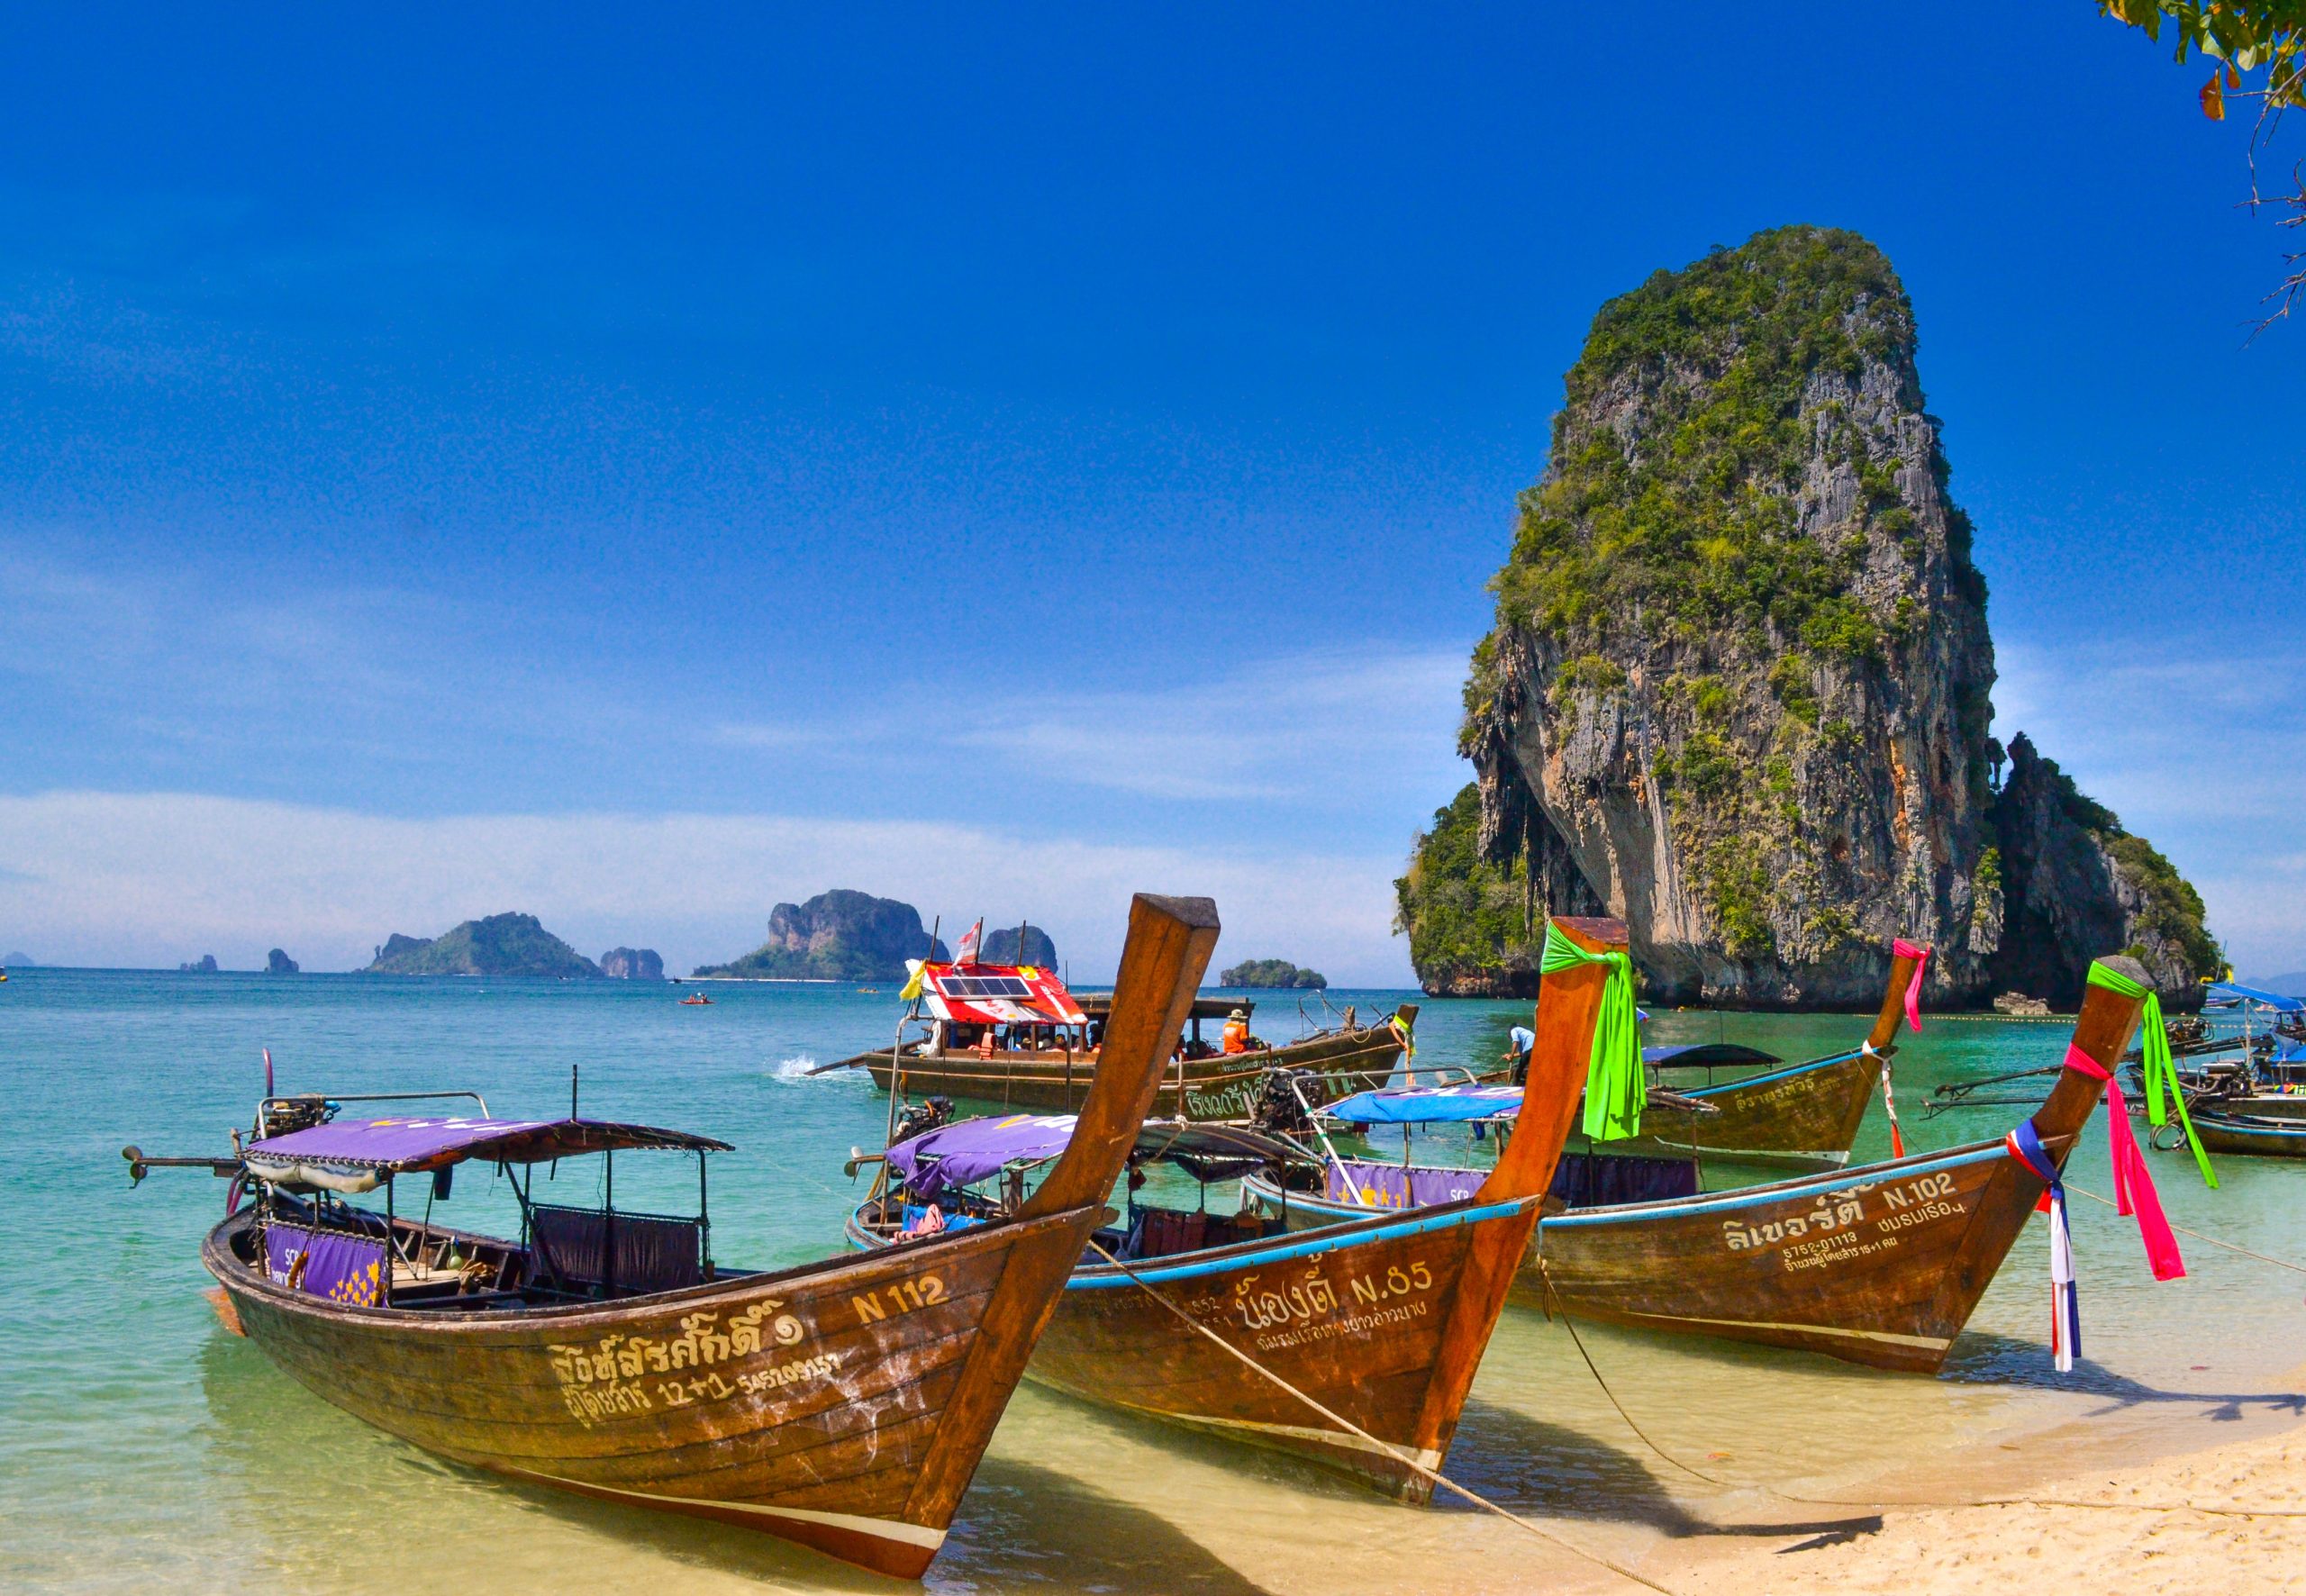 is it ok to visit thailand in june